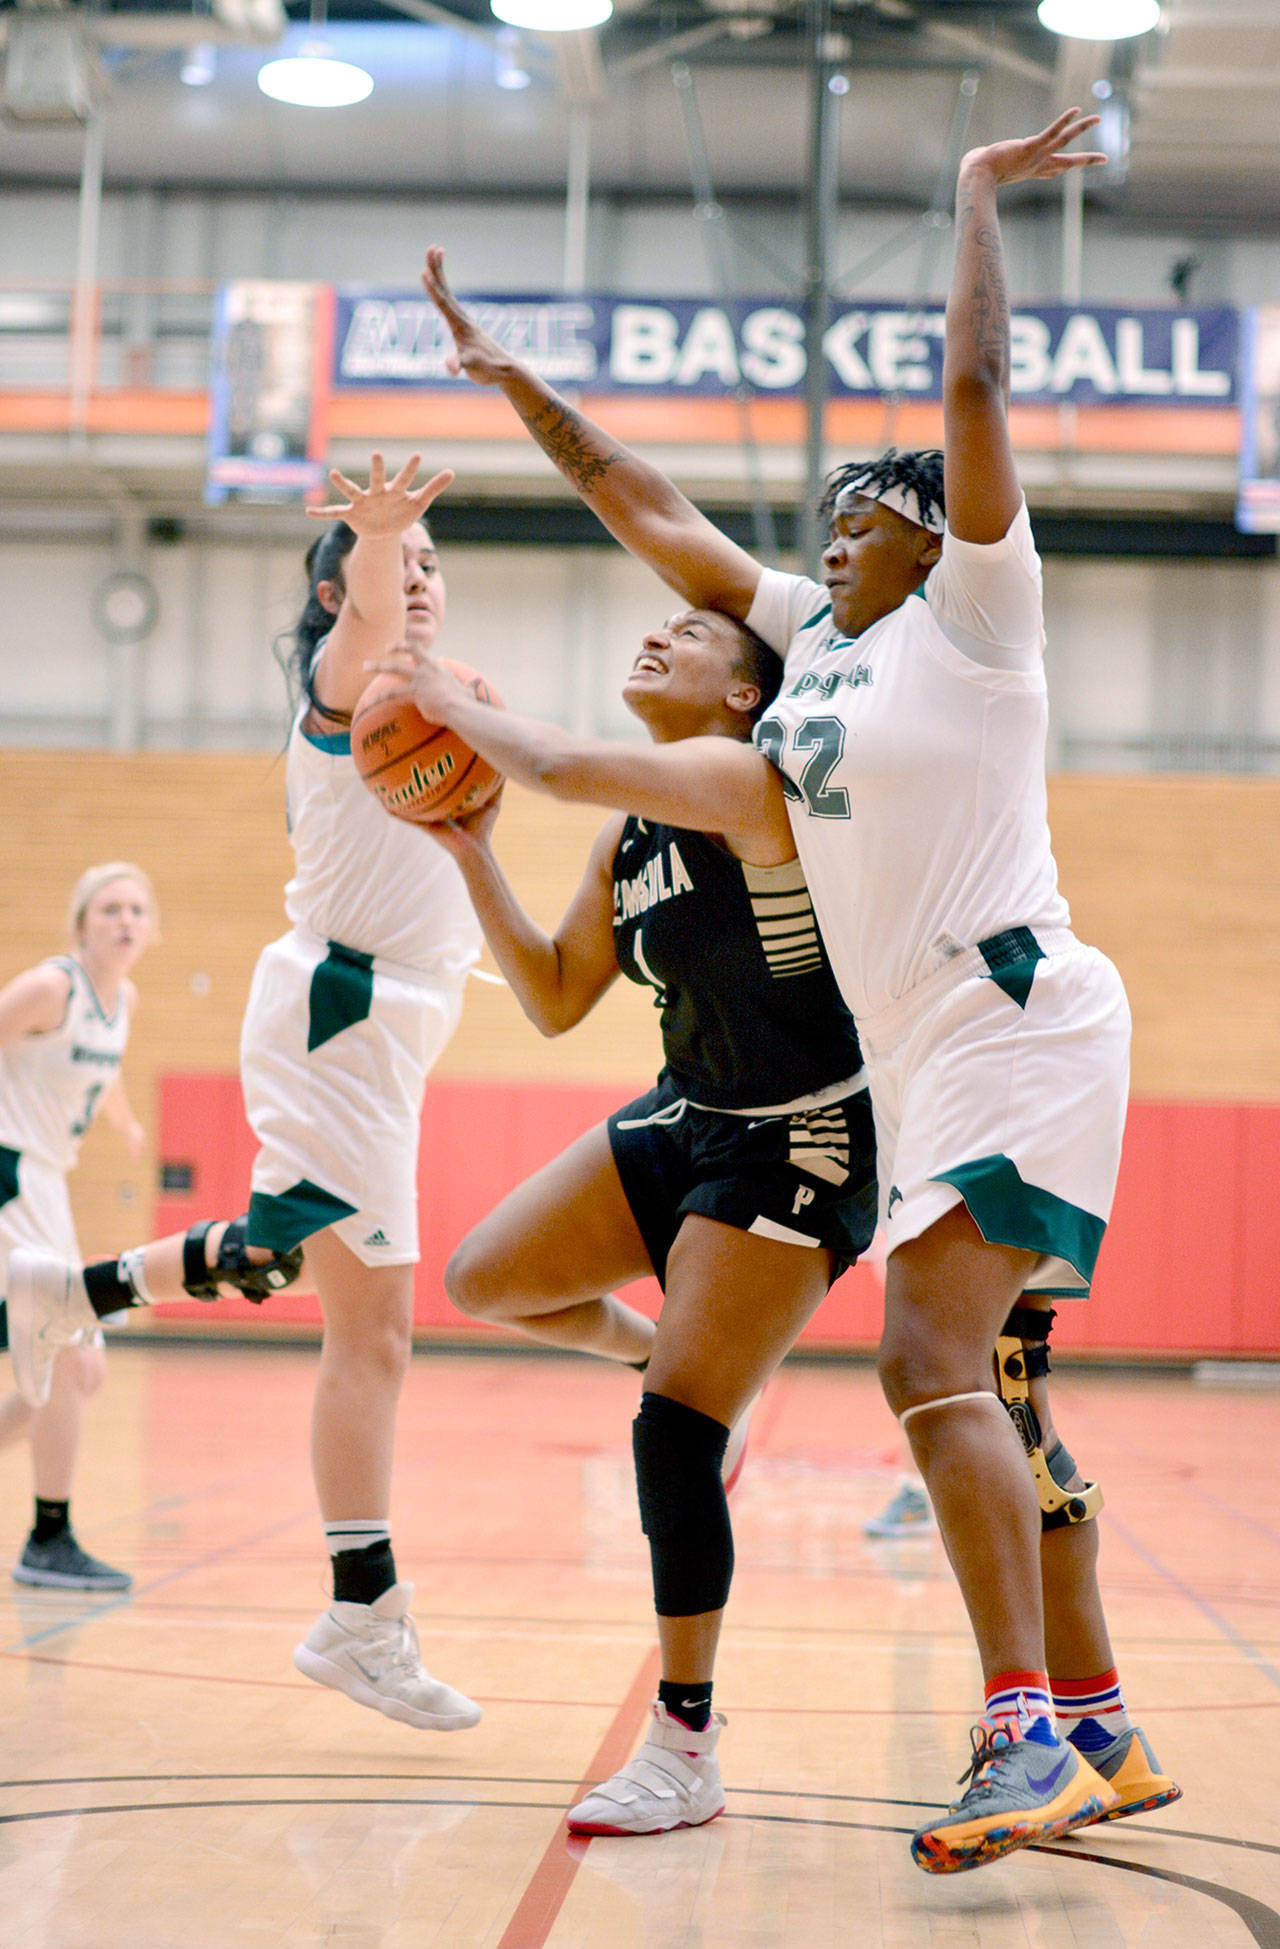 Peninsula’s Jamellia Clark, center, is defended by Umpqua’s Merrily Jones, left, and Dajanay Powell, during the Pirates’ 83-62 loss to Umpqua at the NWAC Women’s Basketball Championships at Everett Community College on Thursday. Jay Cline